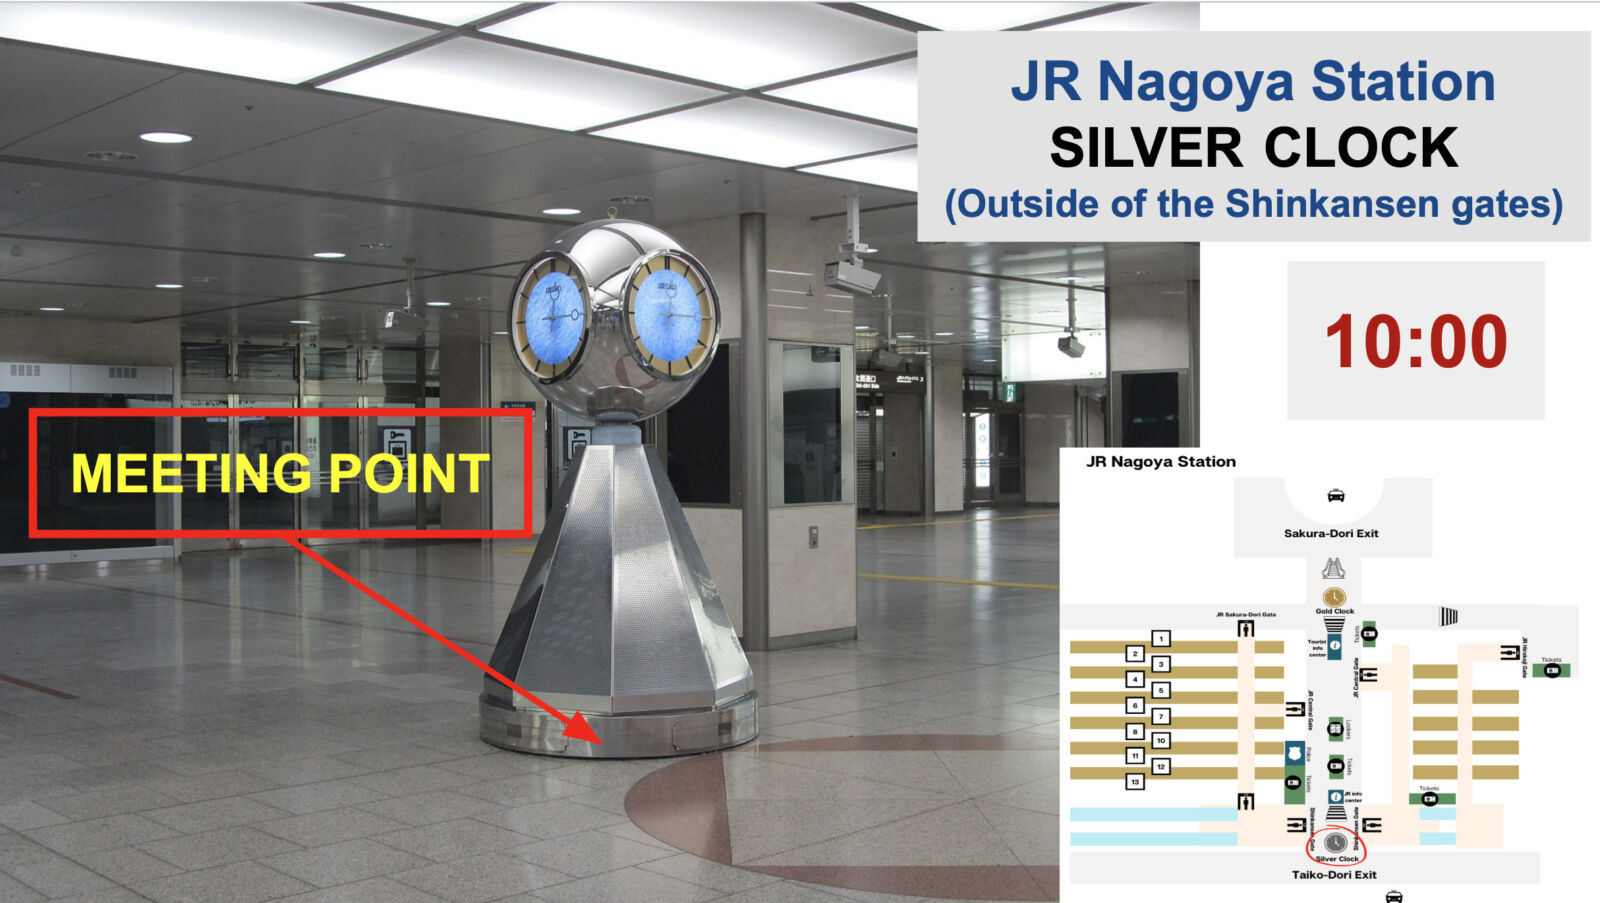 Meet your guide at the base of the SILVER clock tower outside of the Shinkansen gates at 10:00am.